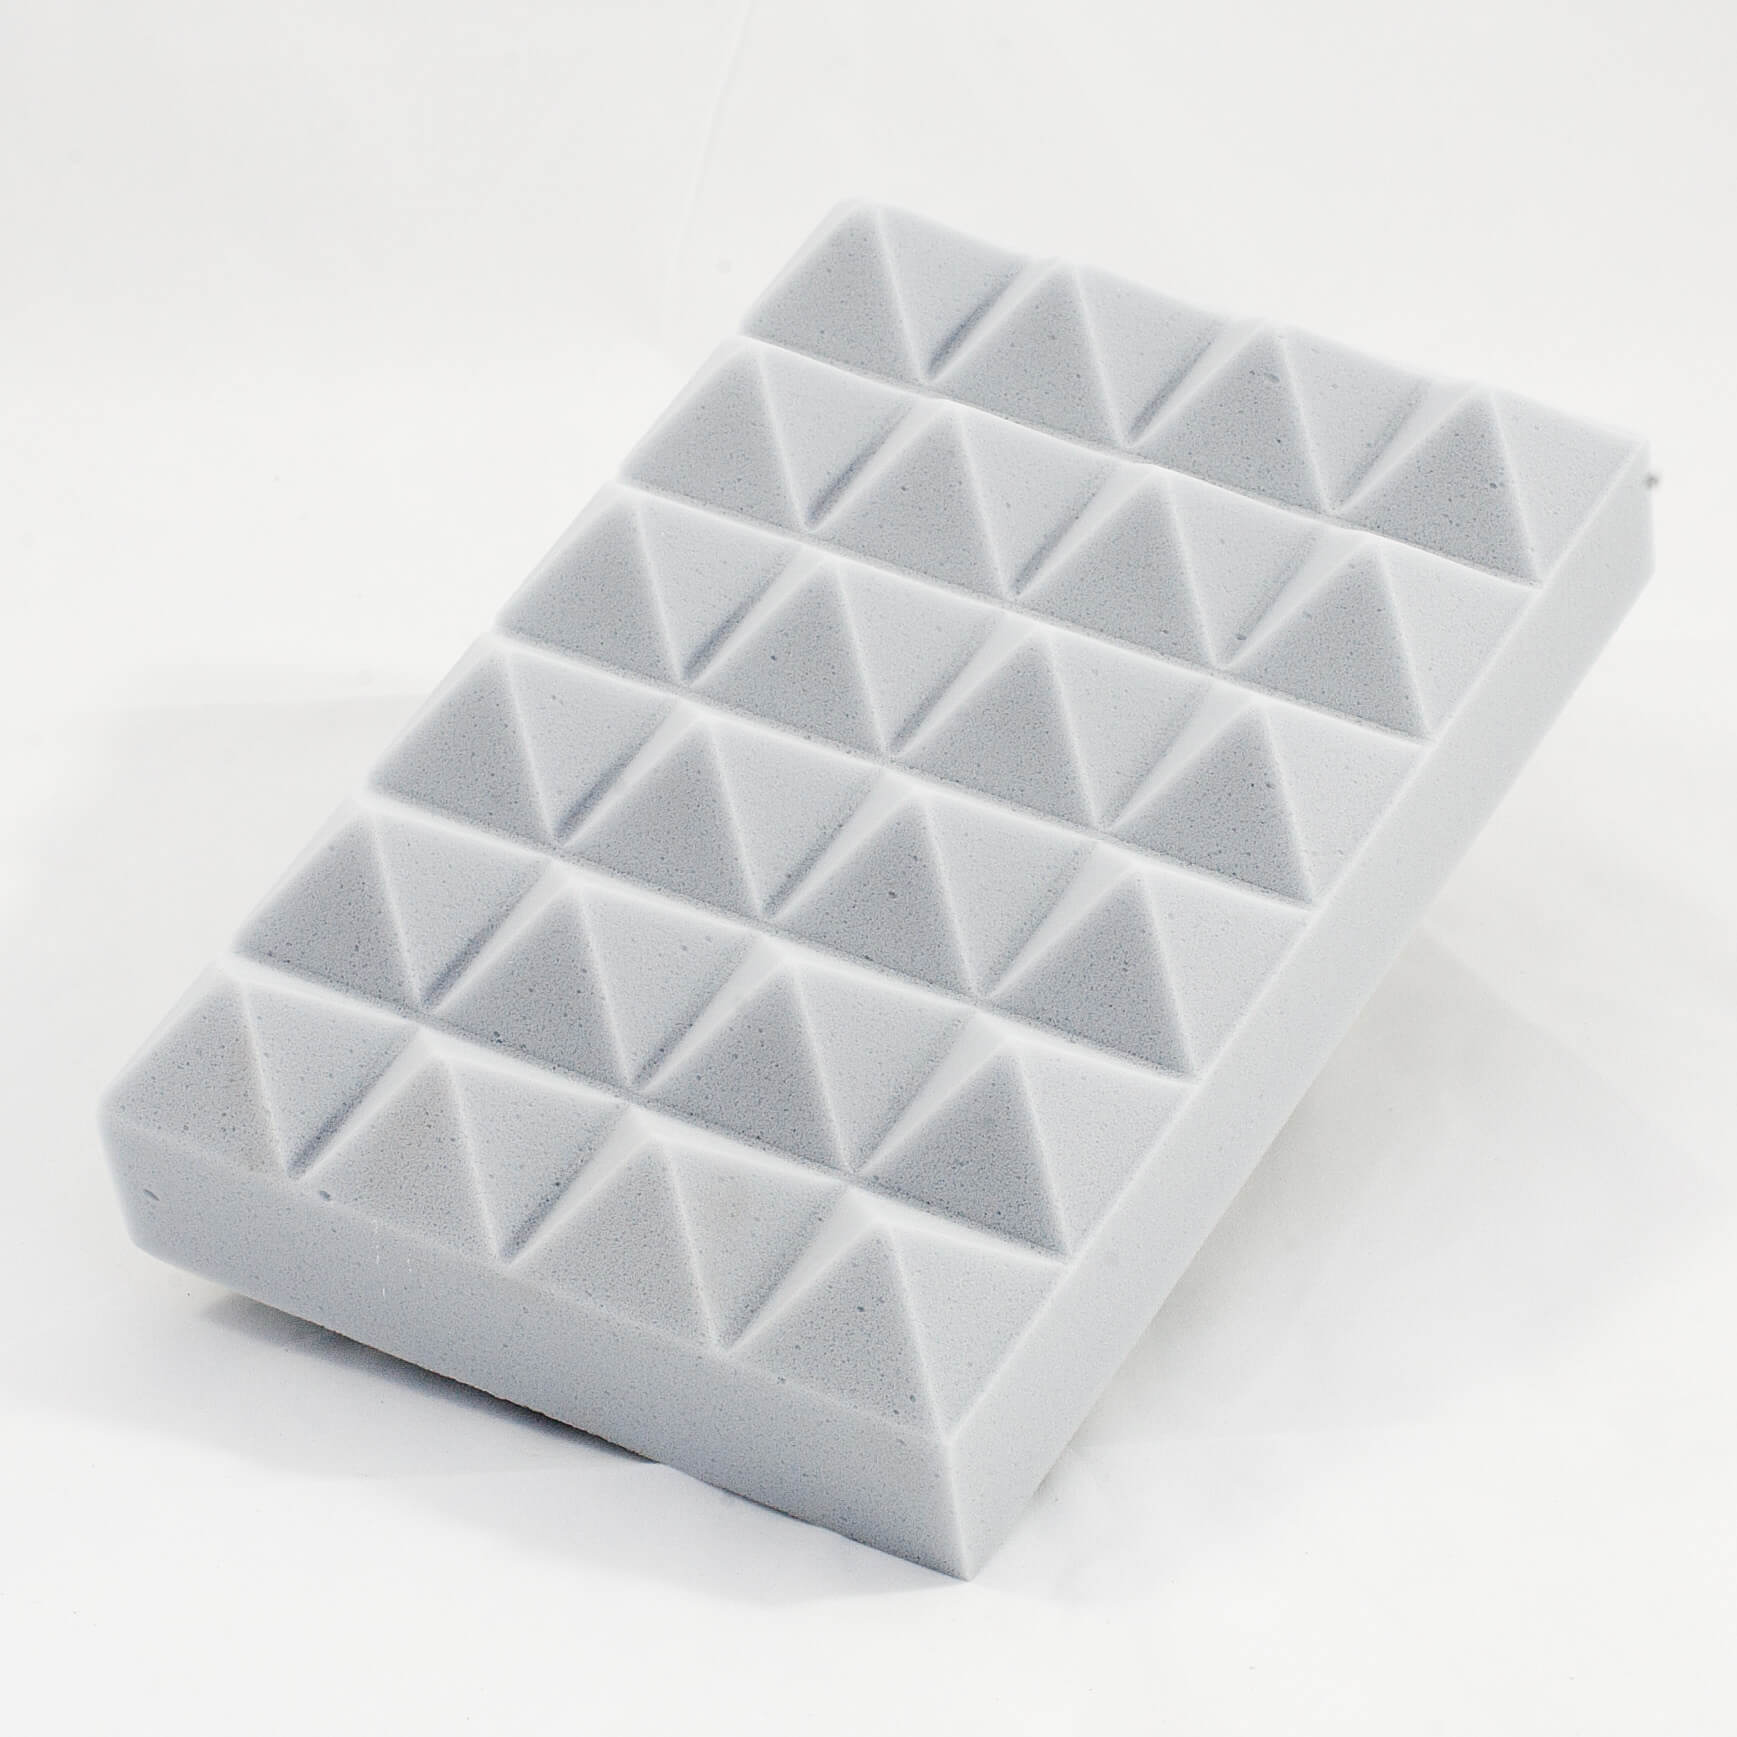 PYRAMIDE Sound absorbent - perfect for music studios and practice rooms